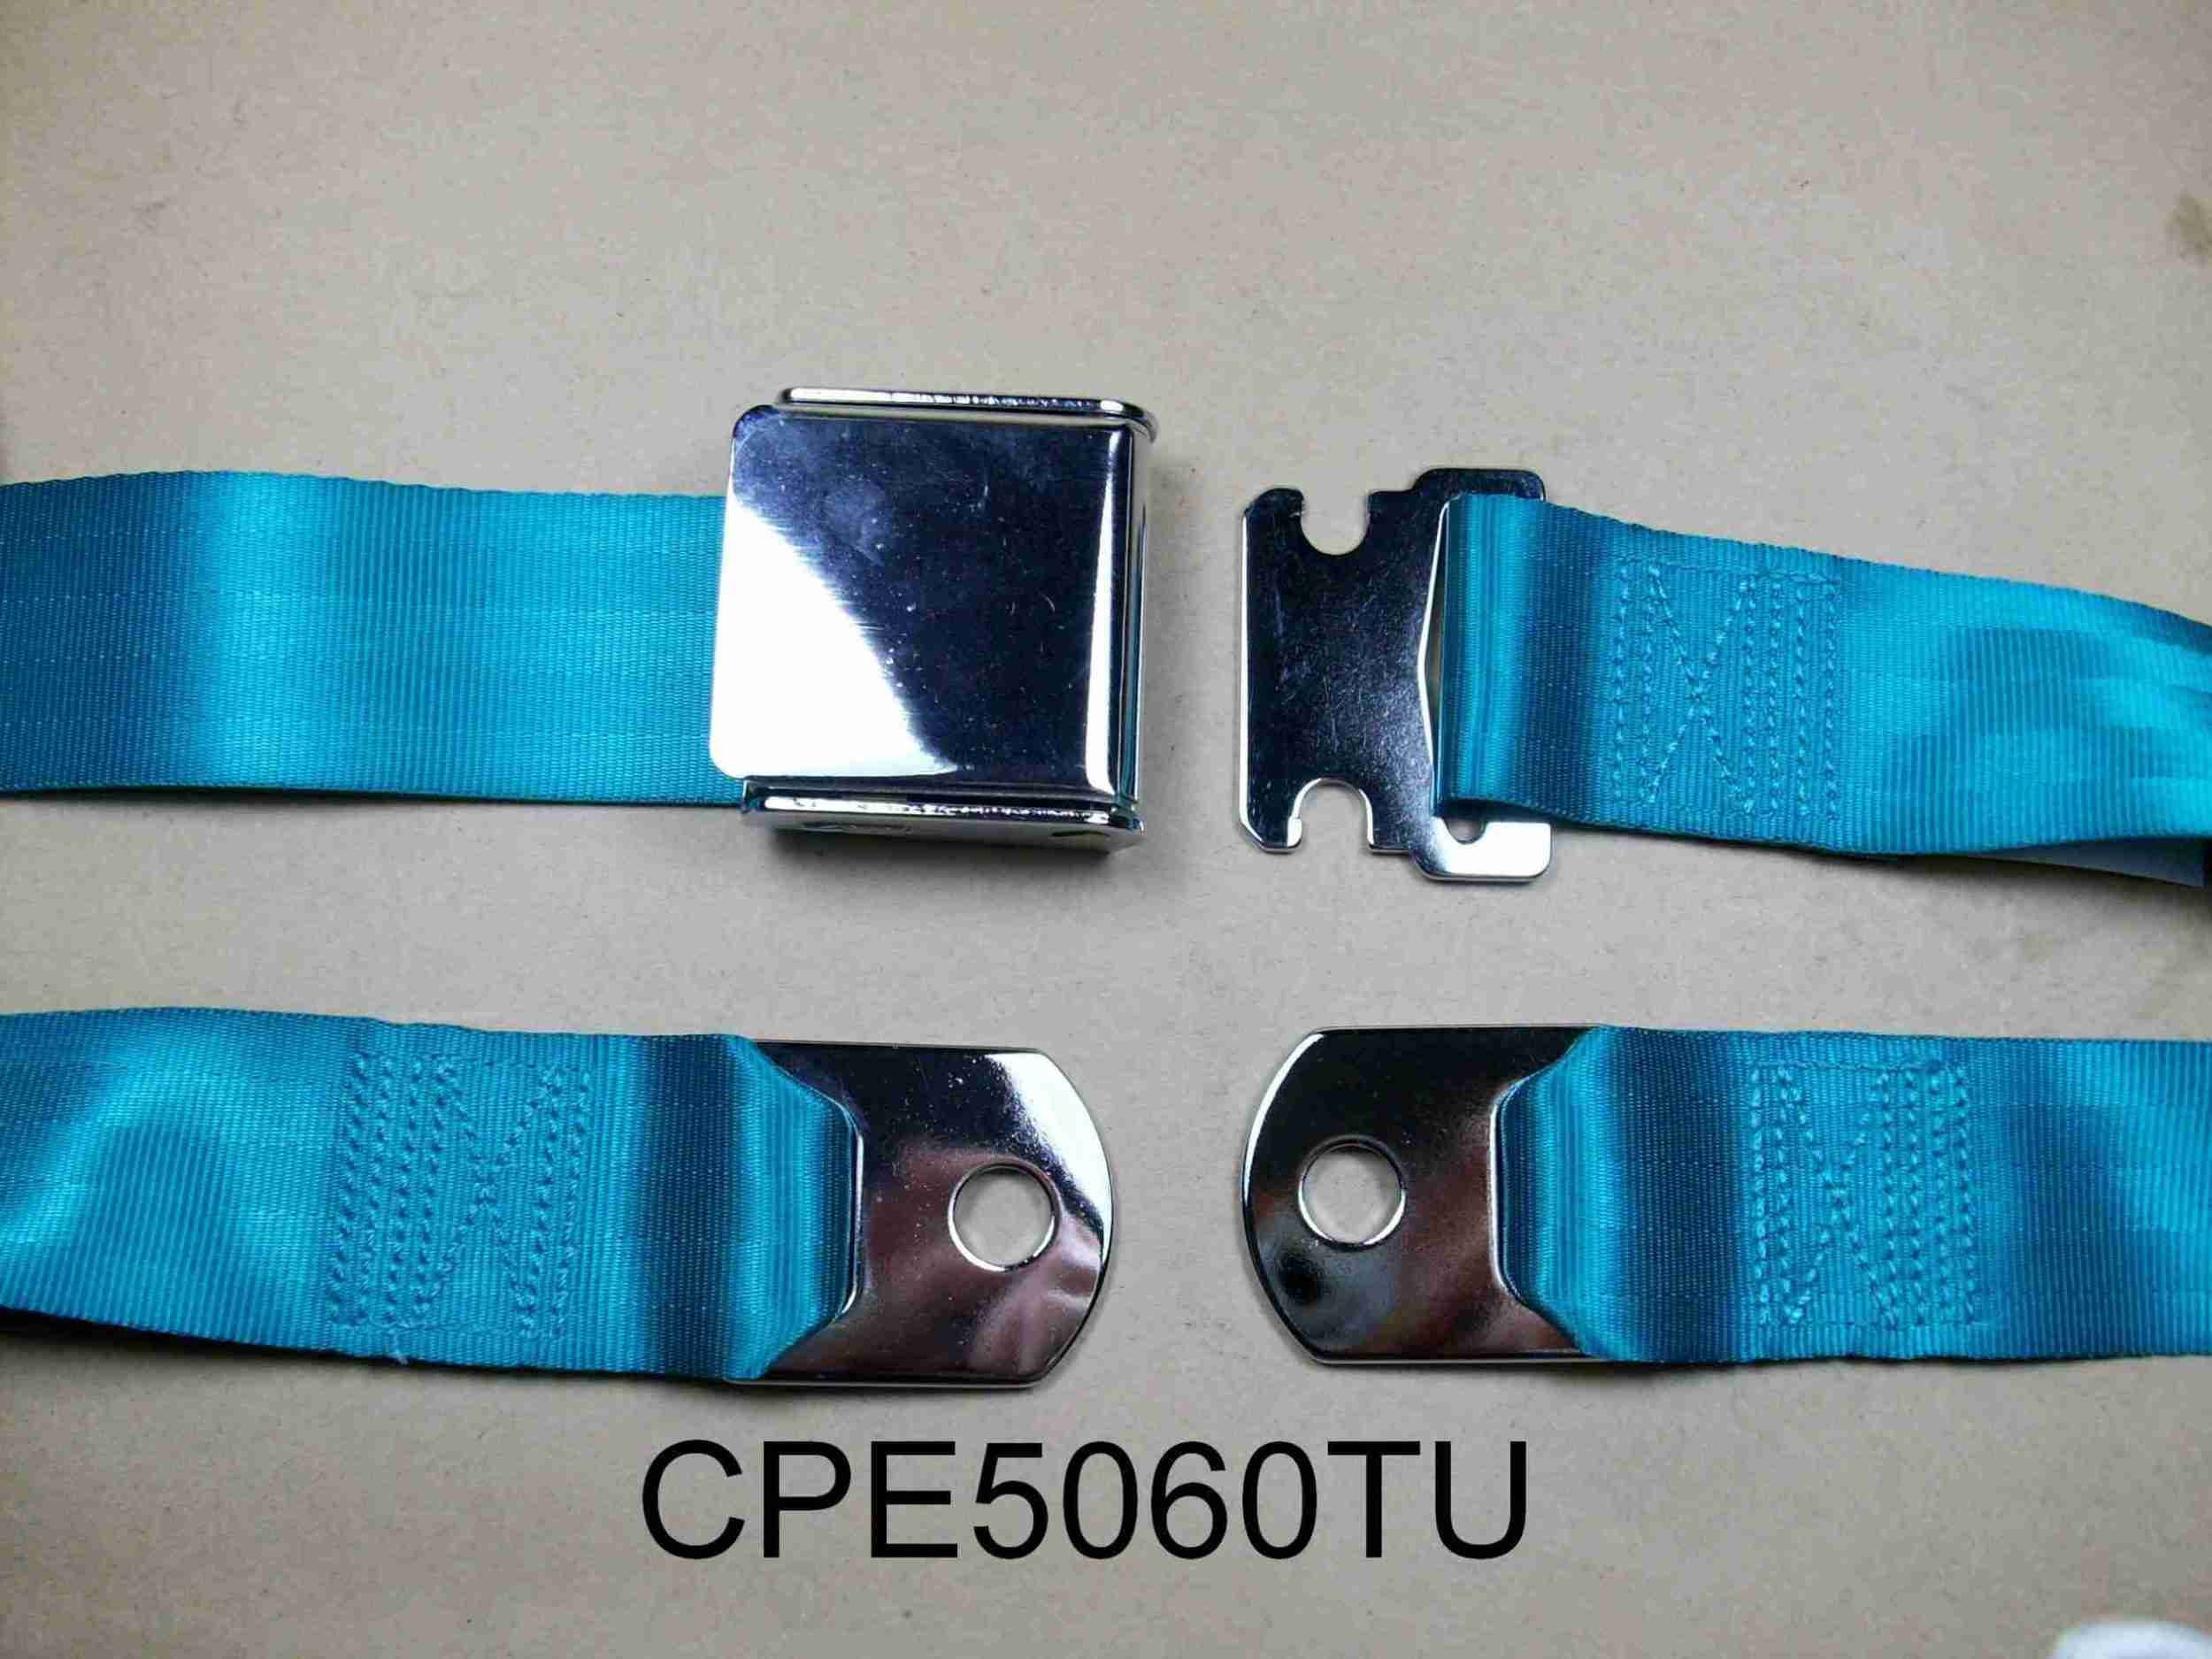 1926-65 60" Turquoise Seat Belt w/ Chrome Aircraft-Style Buckle, 2-point non-retractable lap belt, comes w/ hardware